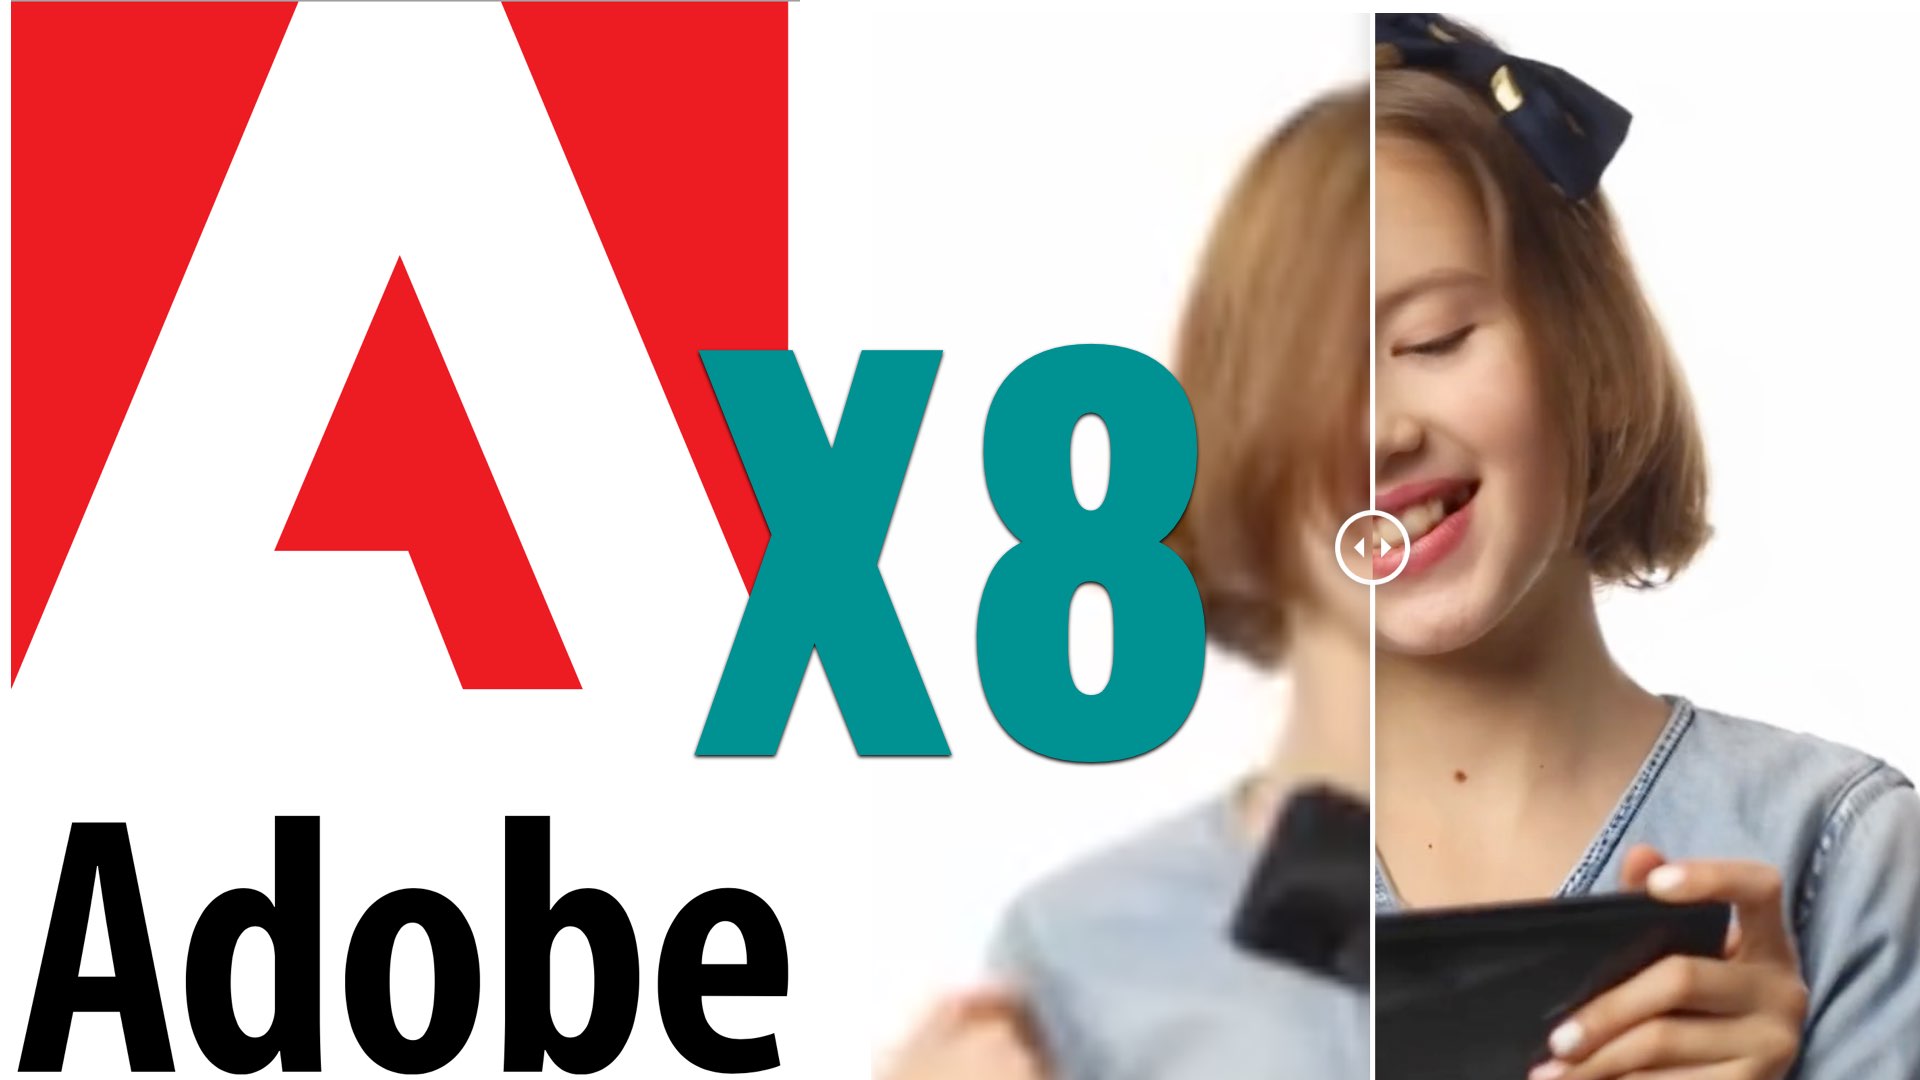 Adobe Introduces VideoGigaGAN: Upscaling Video Resolution X8 With Zero Quality Loss